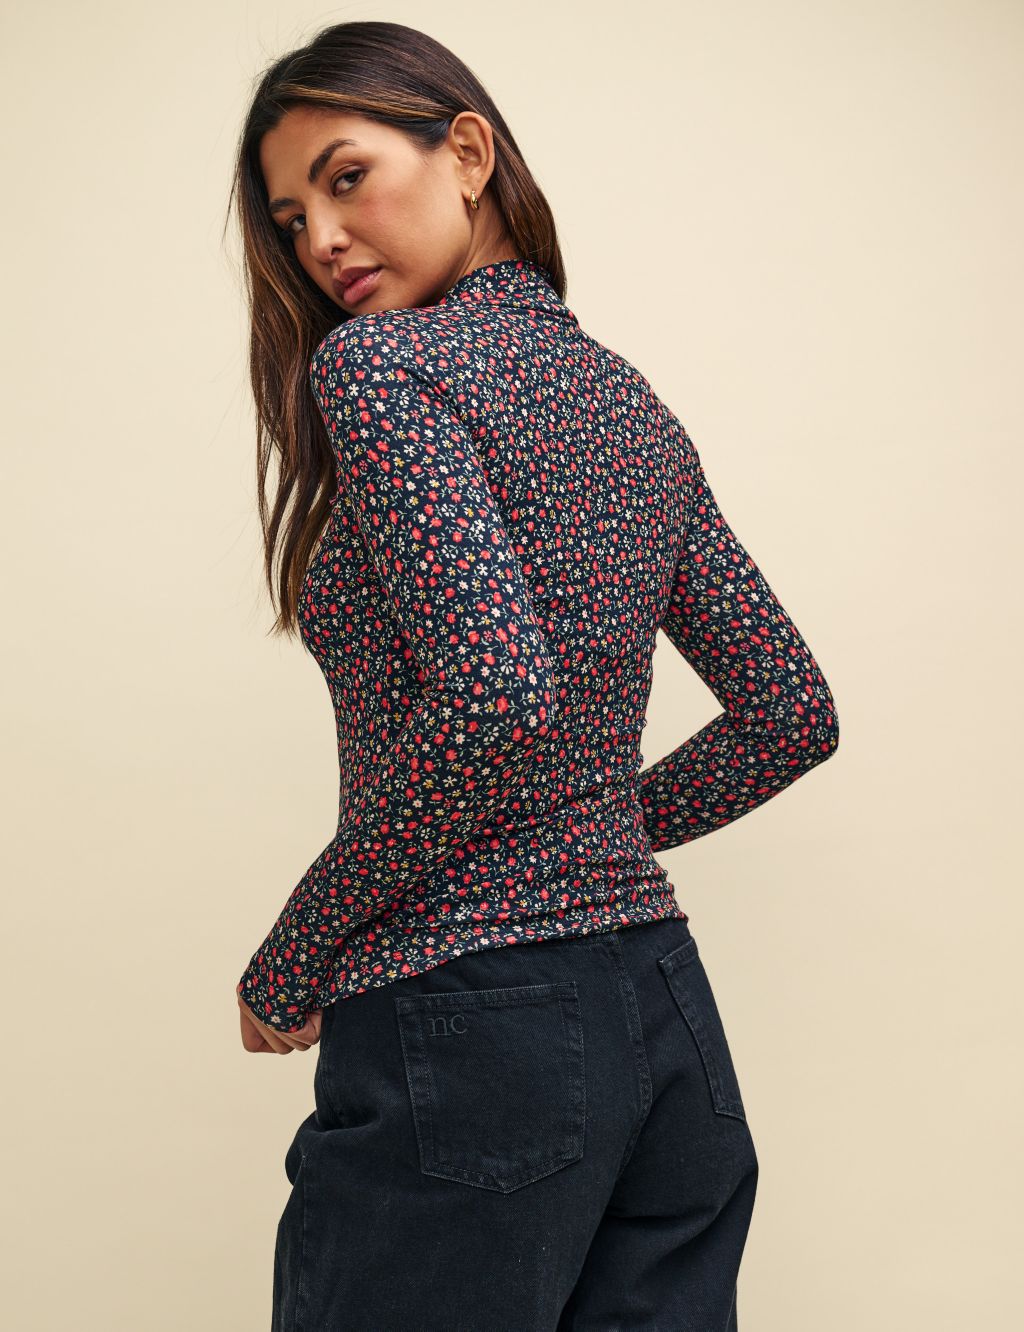 Jersey Floral Top image 2